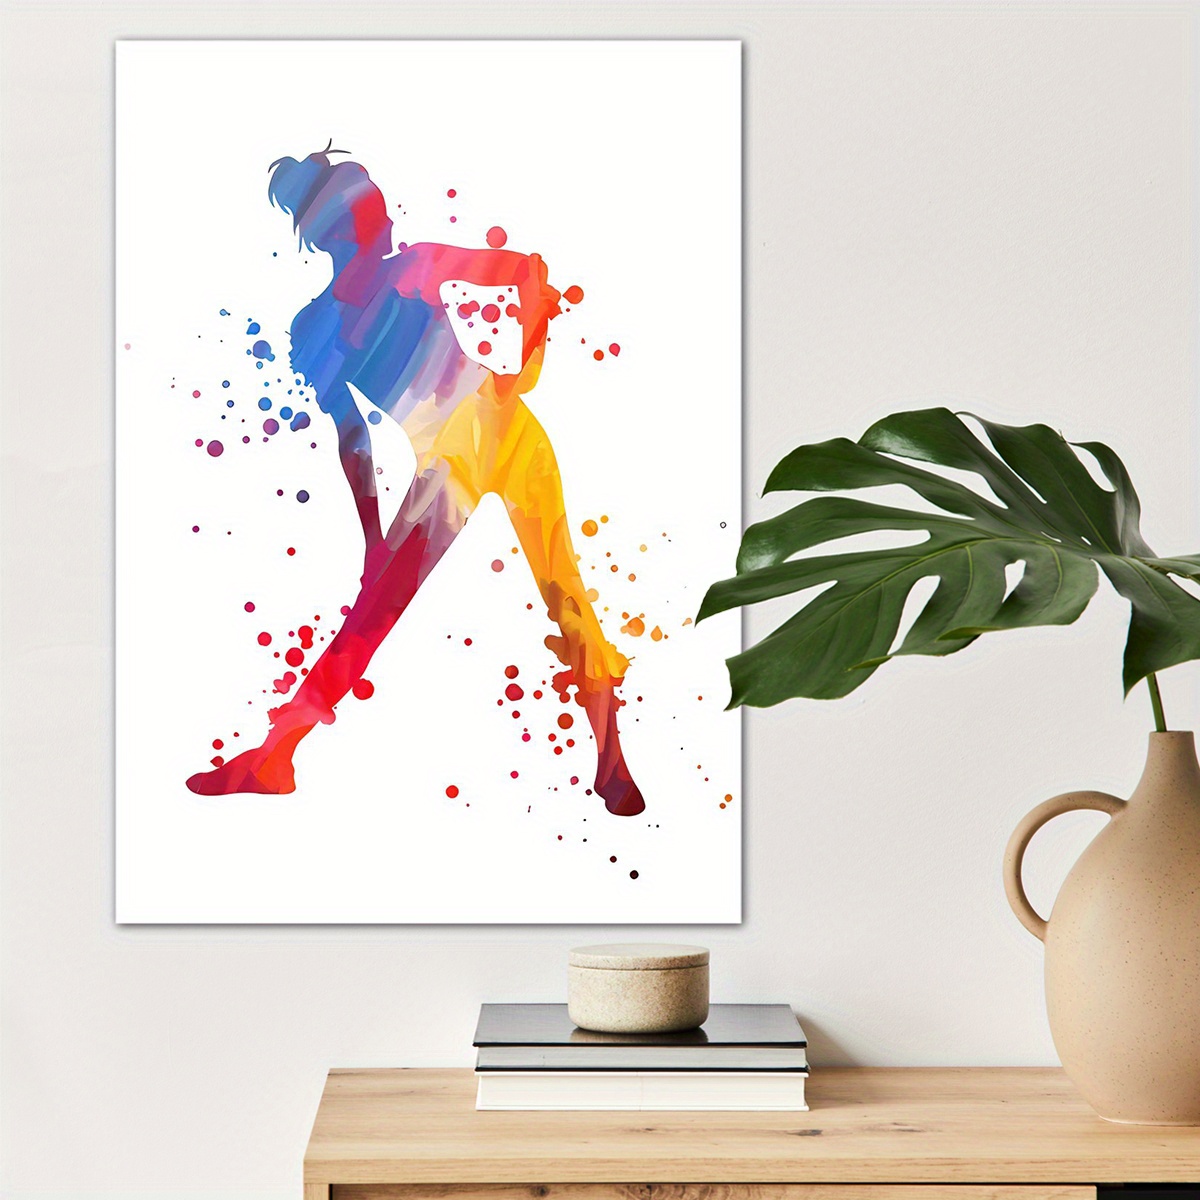 

1pc Fitness Character Poster Canvas Wall Art For Home Decor, Sport Lovers Poster Wall Decor High Quality Canvas Prints For Living Room Bedroom Kitchen Office Cafe Decor, Perfect Gift And Decoration